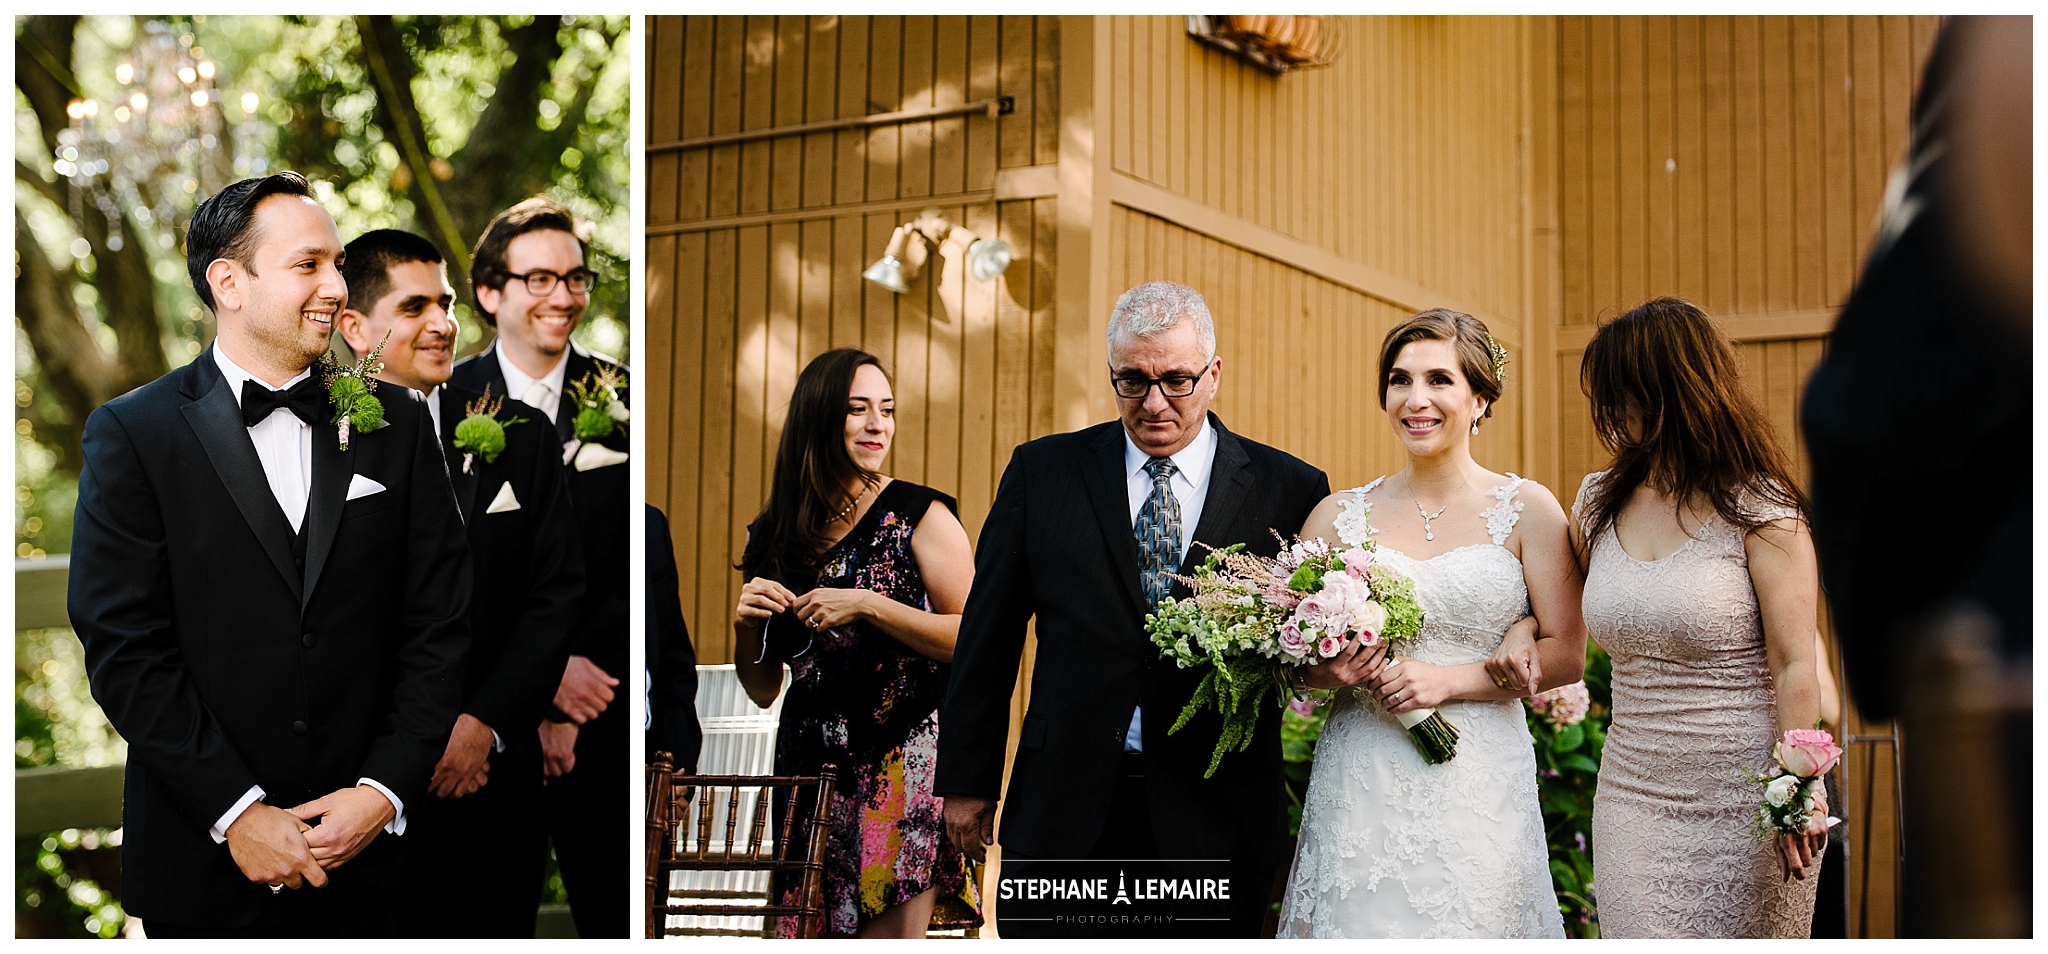 bride being walked down by father at Calamigos Ranch wedding ceremony by Stephane Lemaire Photography 